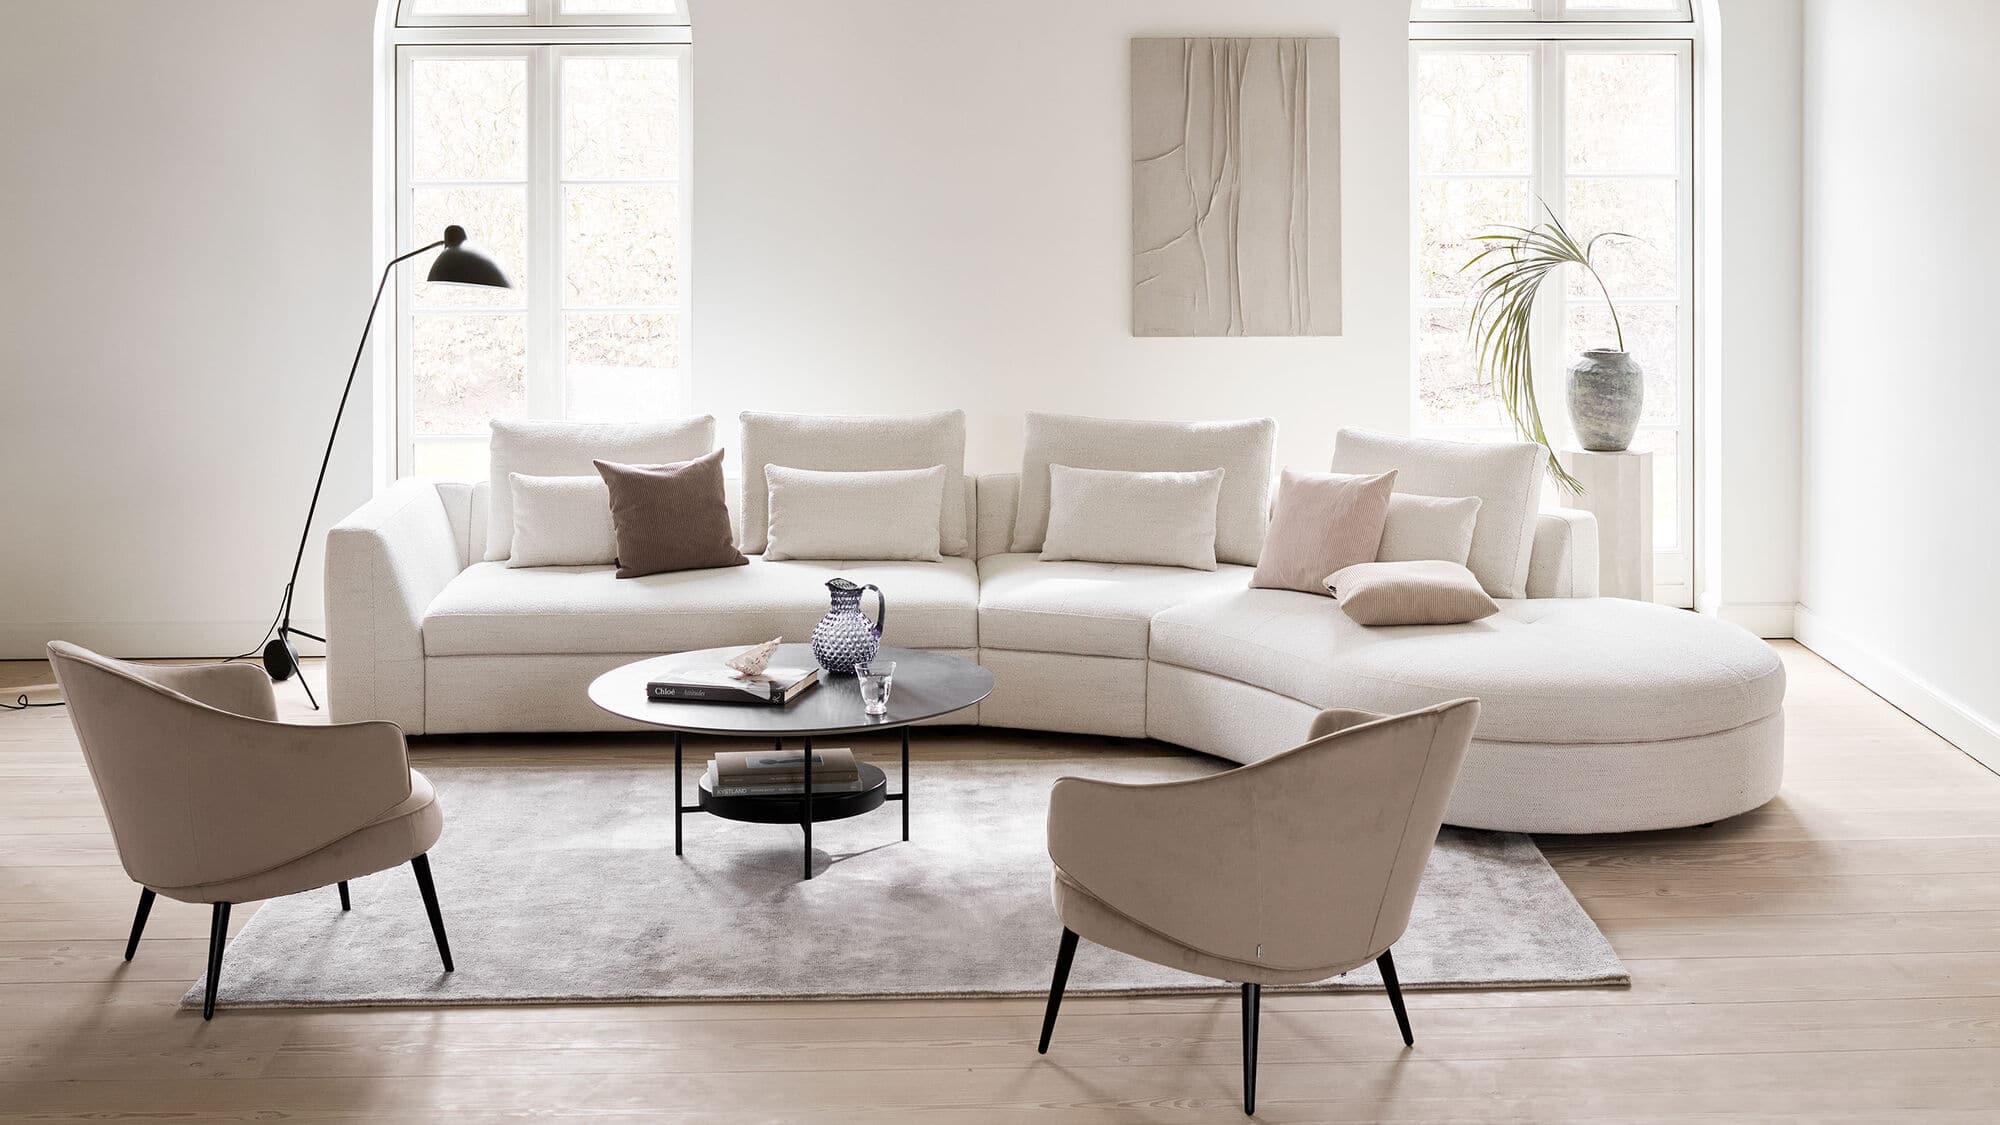 bergamo couch with round lounging is a trendy piece of furniture for your contemporary style minimal room, coffee table in the centre, rug under the furniture, chair